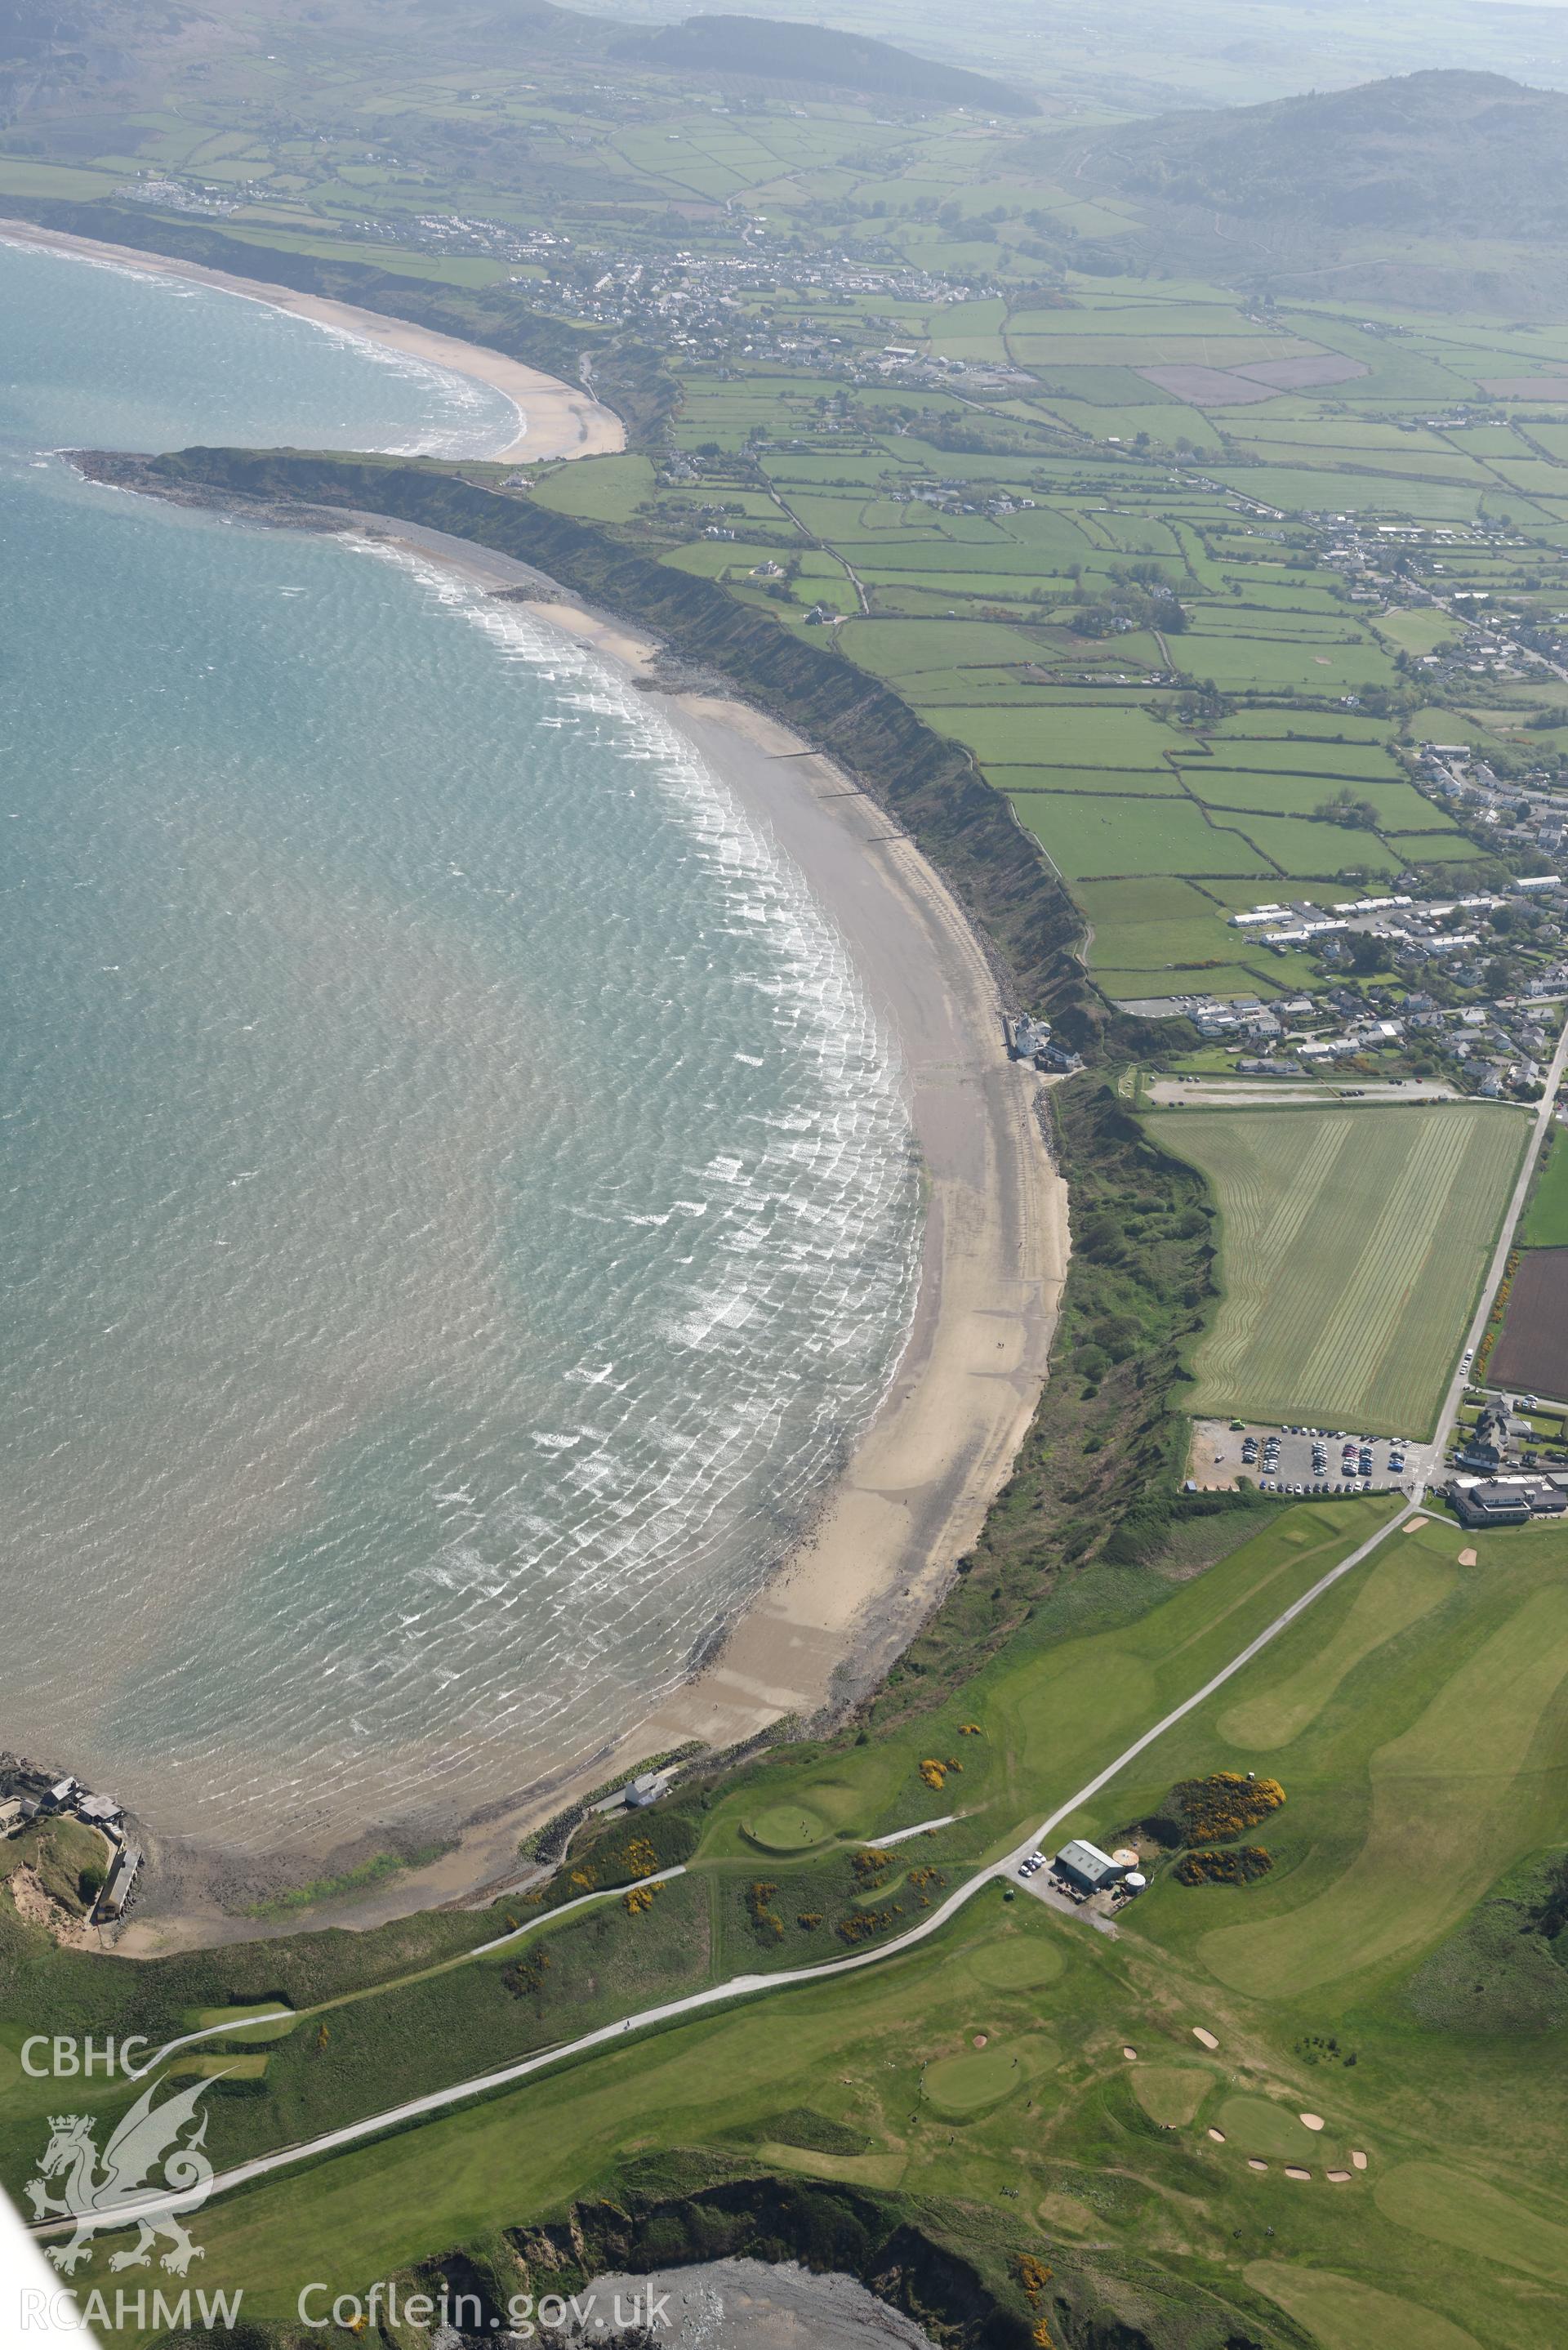 Aerial photography of Morfa Nefyn taken on 3rd May 2017.  Baseline aerial reconnaissance survey for the CHERISH Project. ? Crown: CHERISH PROJECT 2017. Produced with EU funds through the Ireland Wales Co-operation Programme 2014-2020. All material made freely available through the Open Government Licence.